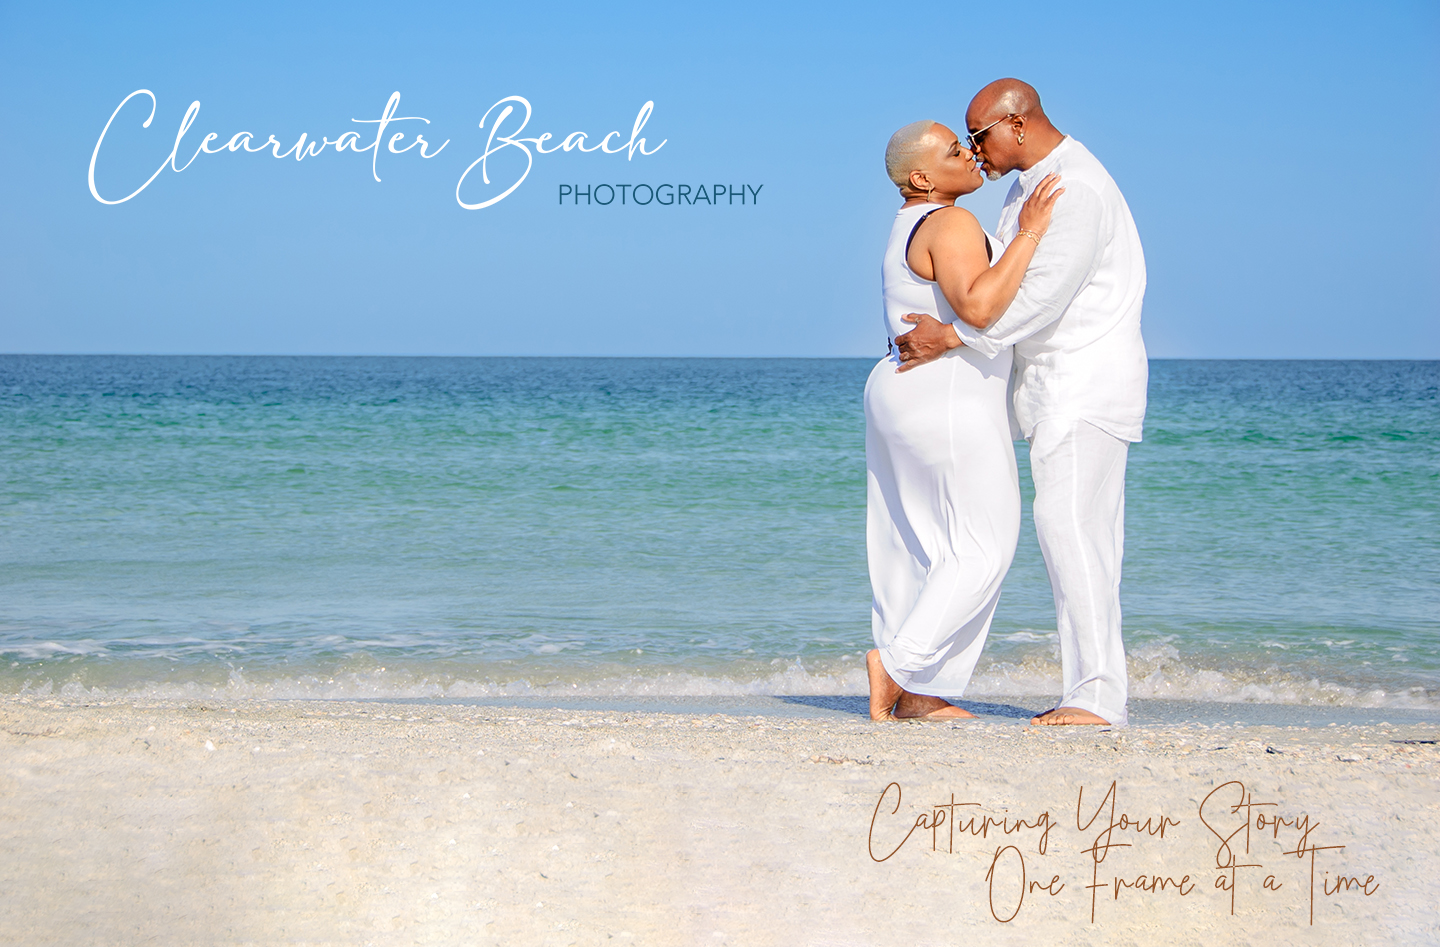 Clearwater Beach Photography photo of couple kissing by water